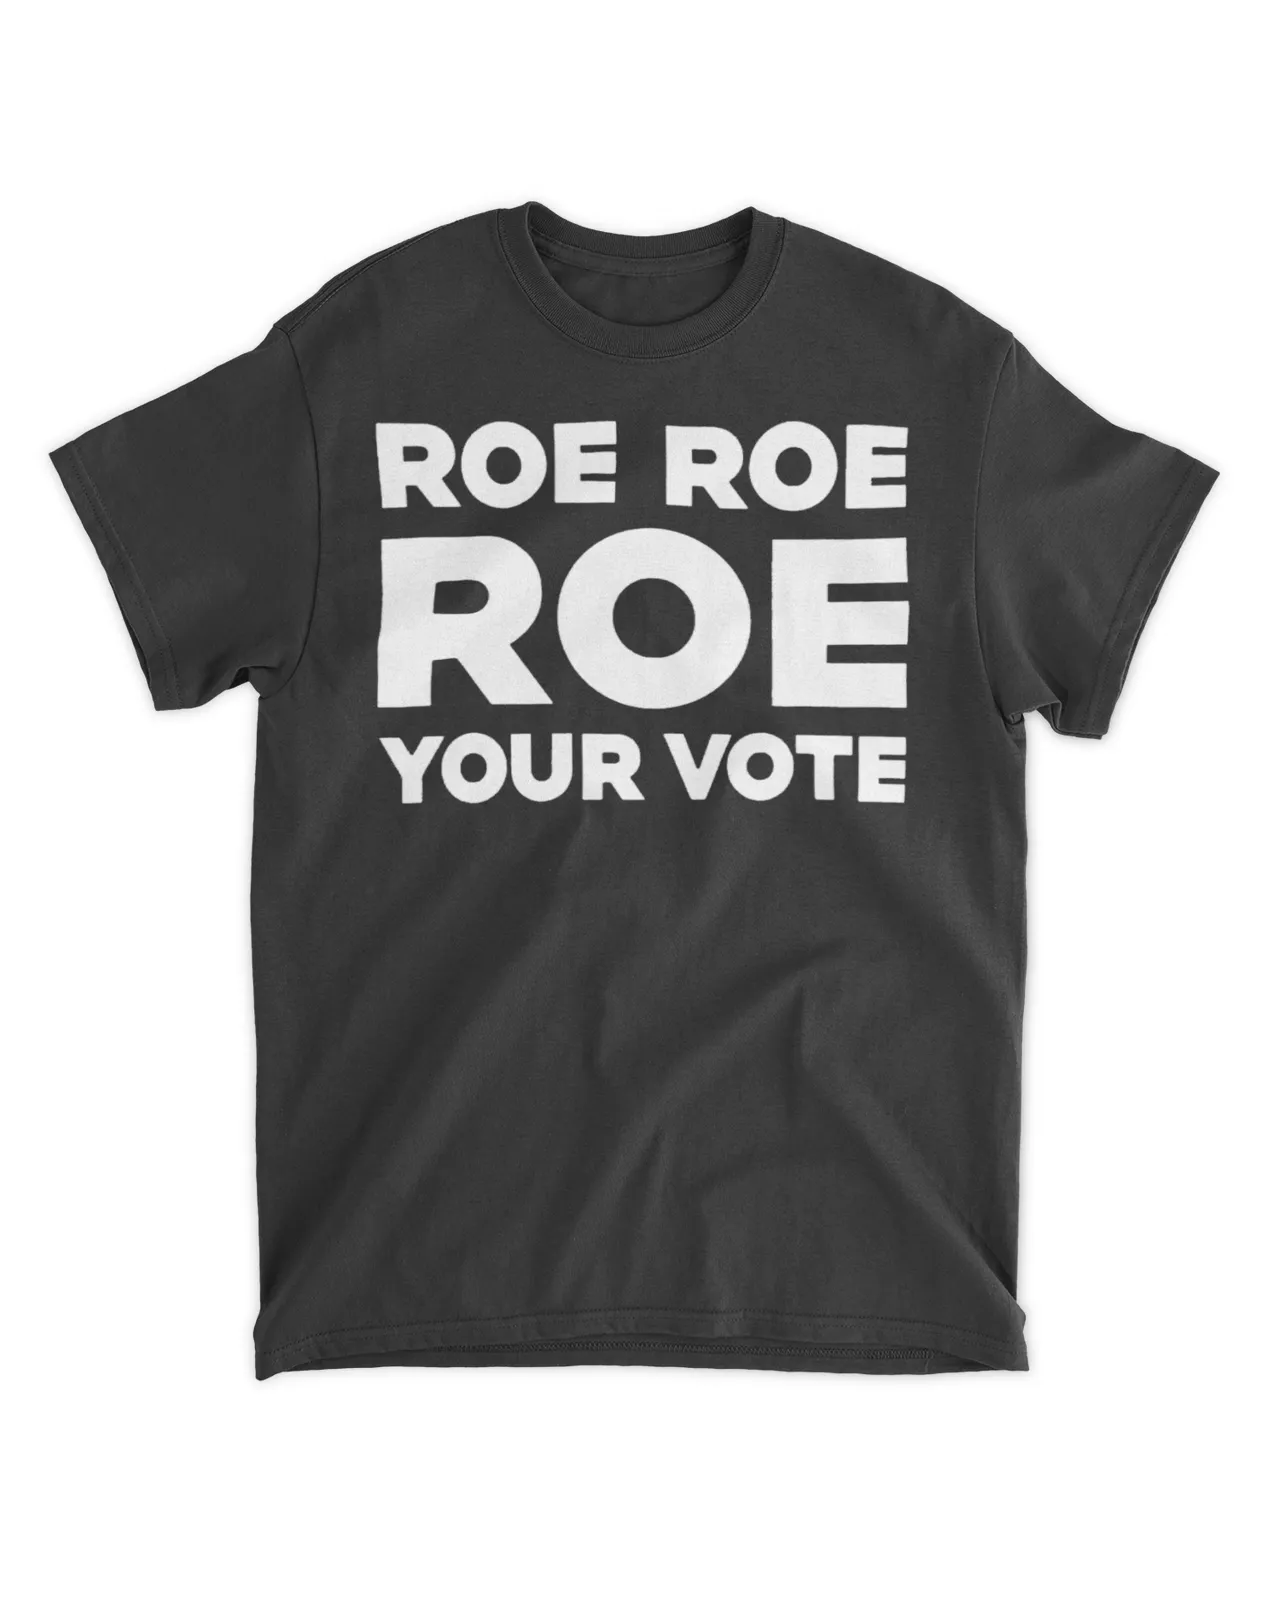  Roe Roe Roe your vote shirt